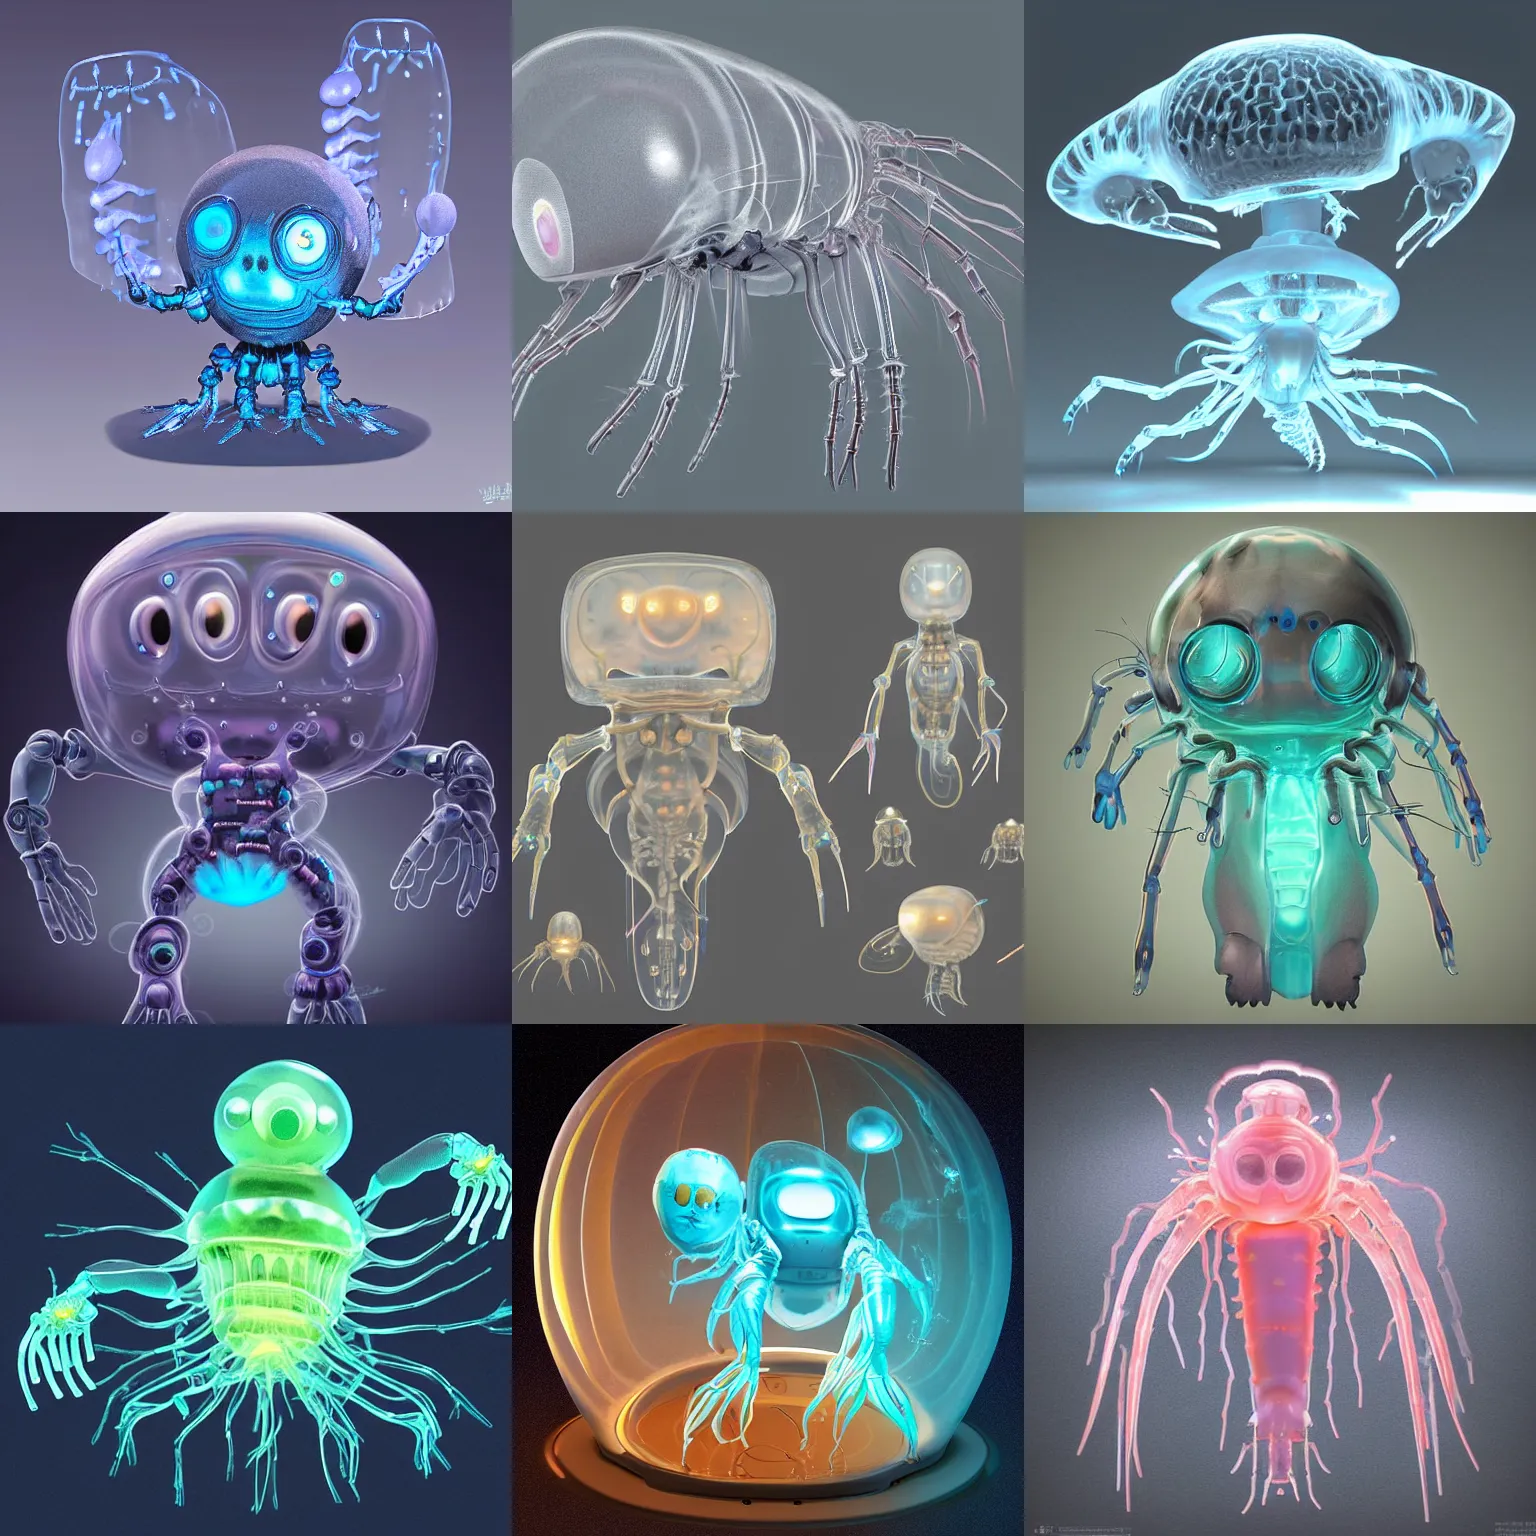 Prompt: cute! cute baby robot jelly fish, ghost shrimp, biomechanical xray, deepsea, irobot, glowing from inside, wrinkled, by Wayne Barlowe, Barreleye fish, translucent SSS, rimlight, dancing, fighting, bioluminescent screaming pictoplasma characterdesign toydesign toy monster creature, zbrush, octane, hardsurface modelling, artstation, cg society, by greg rutkowksi, by Eddie Mendoza, by Peter mohrbacher, by tooth wu, cyberpunk